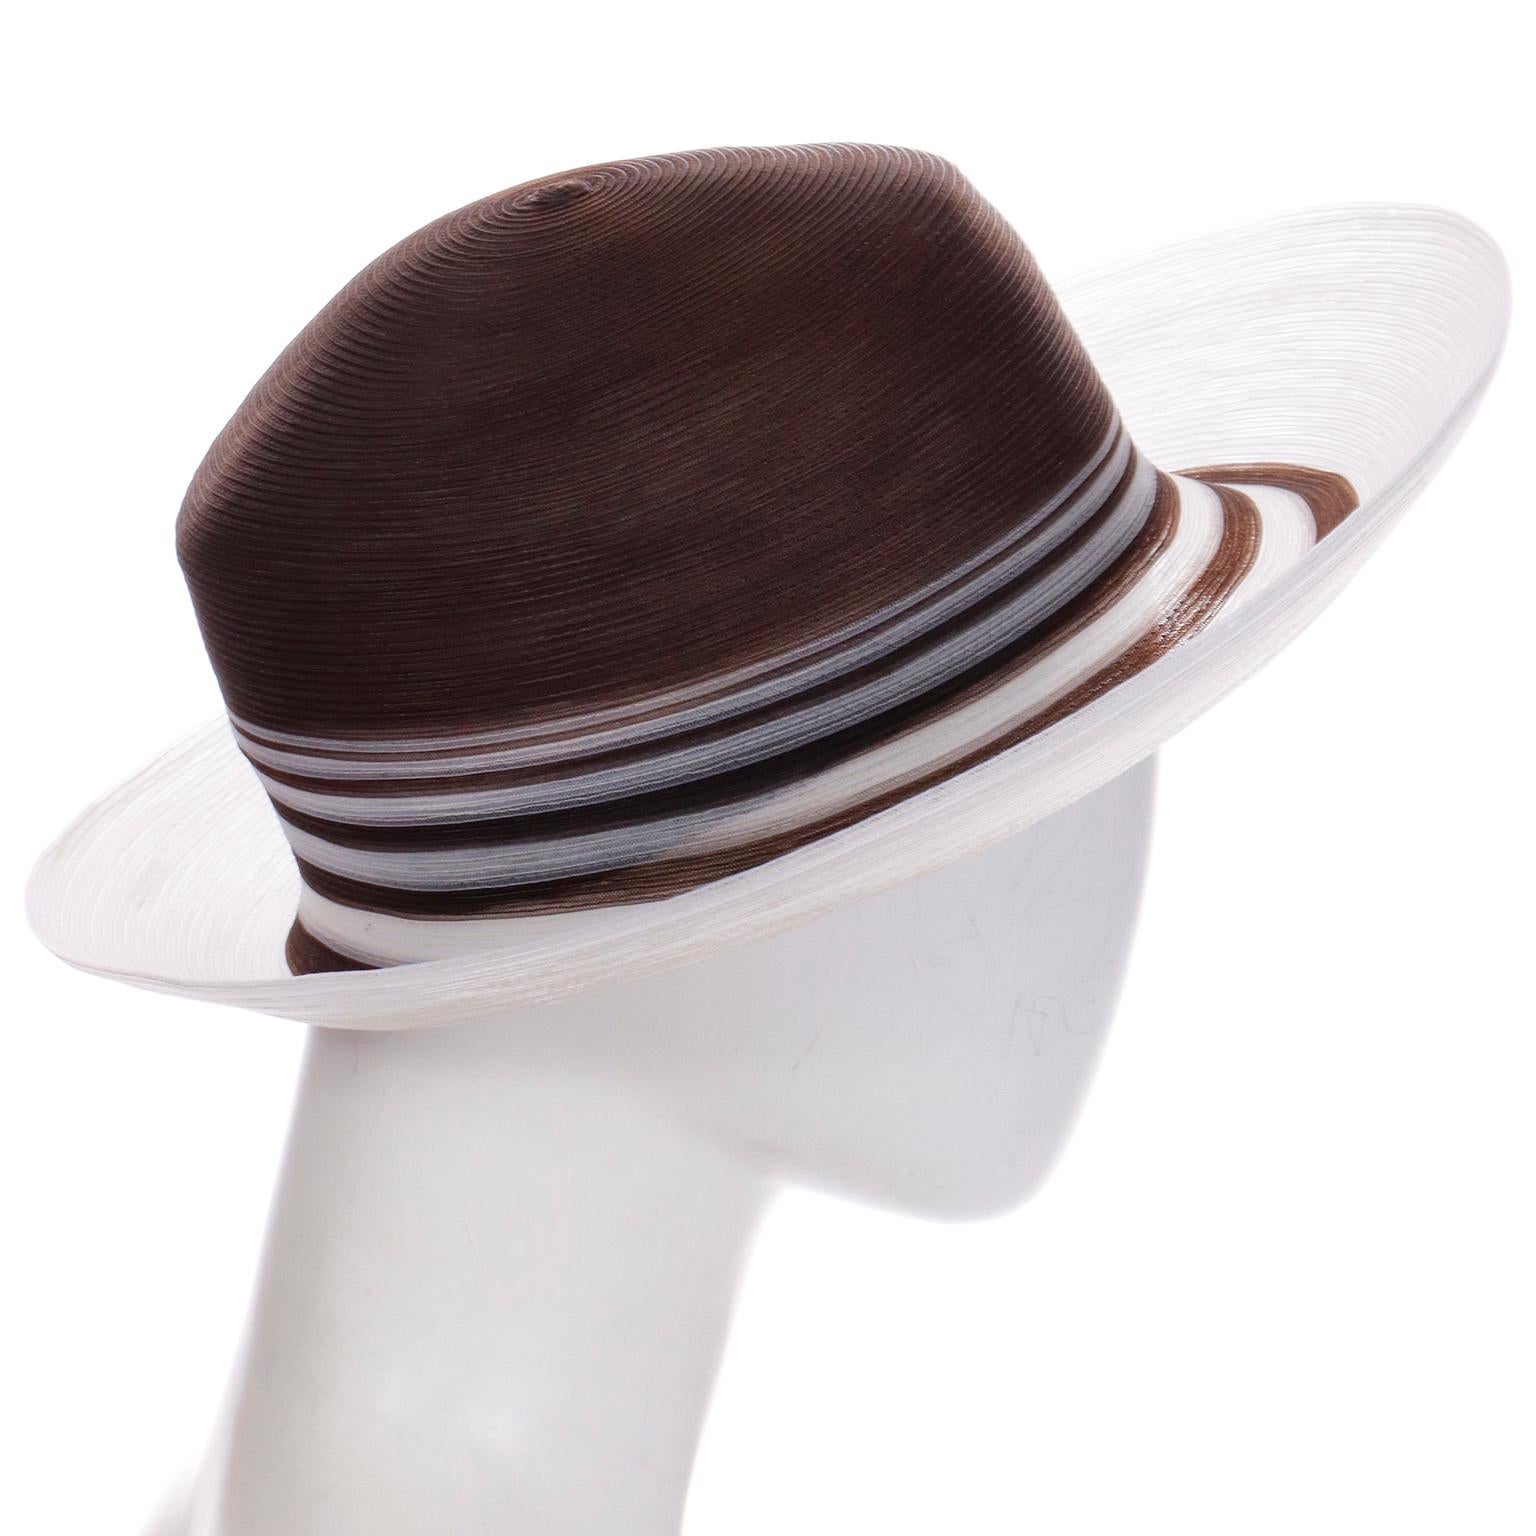 Patricia Underwood Vintage Brown and White Striped Summer Hat In Excellent Condition For Sale In Portland, OR